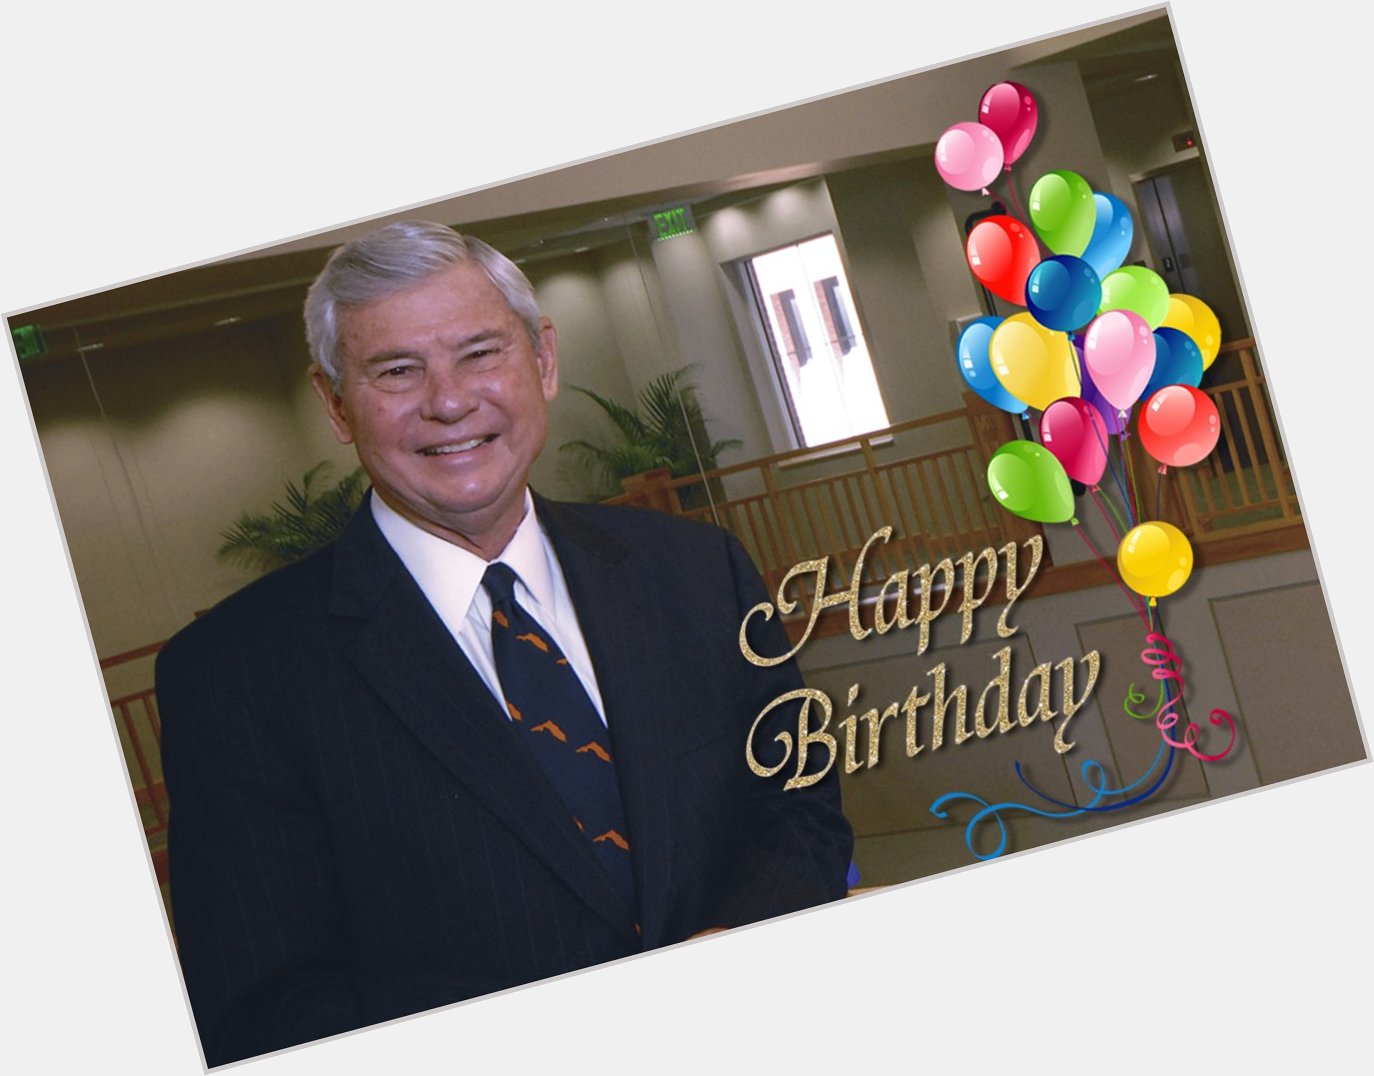 Please join us in wishing fmr. US Senator and Florida Governor Bob Graham a happy birthday! 